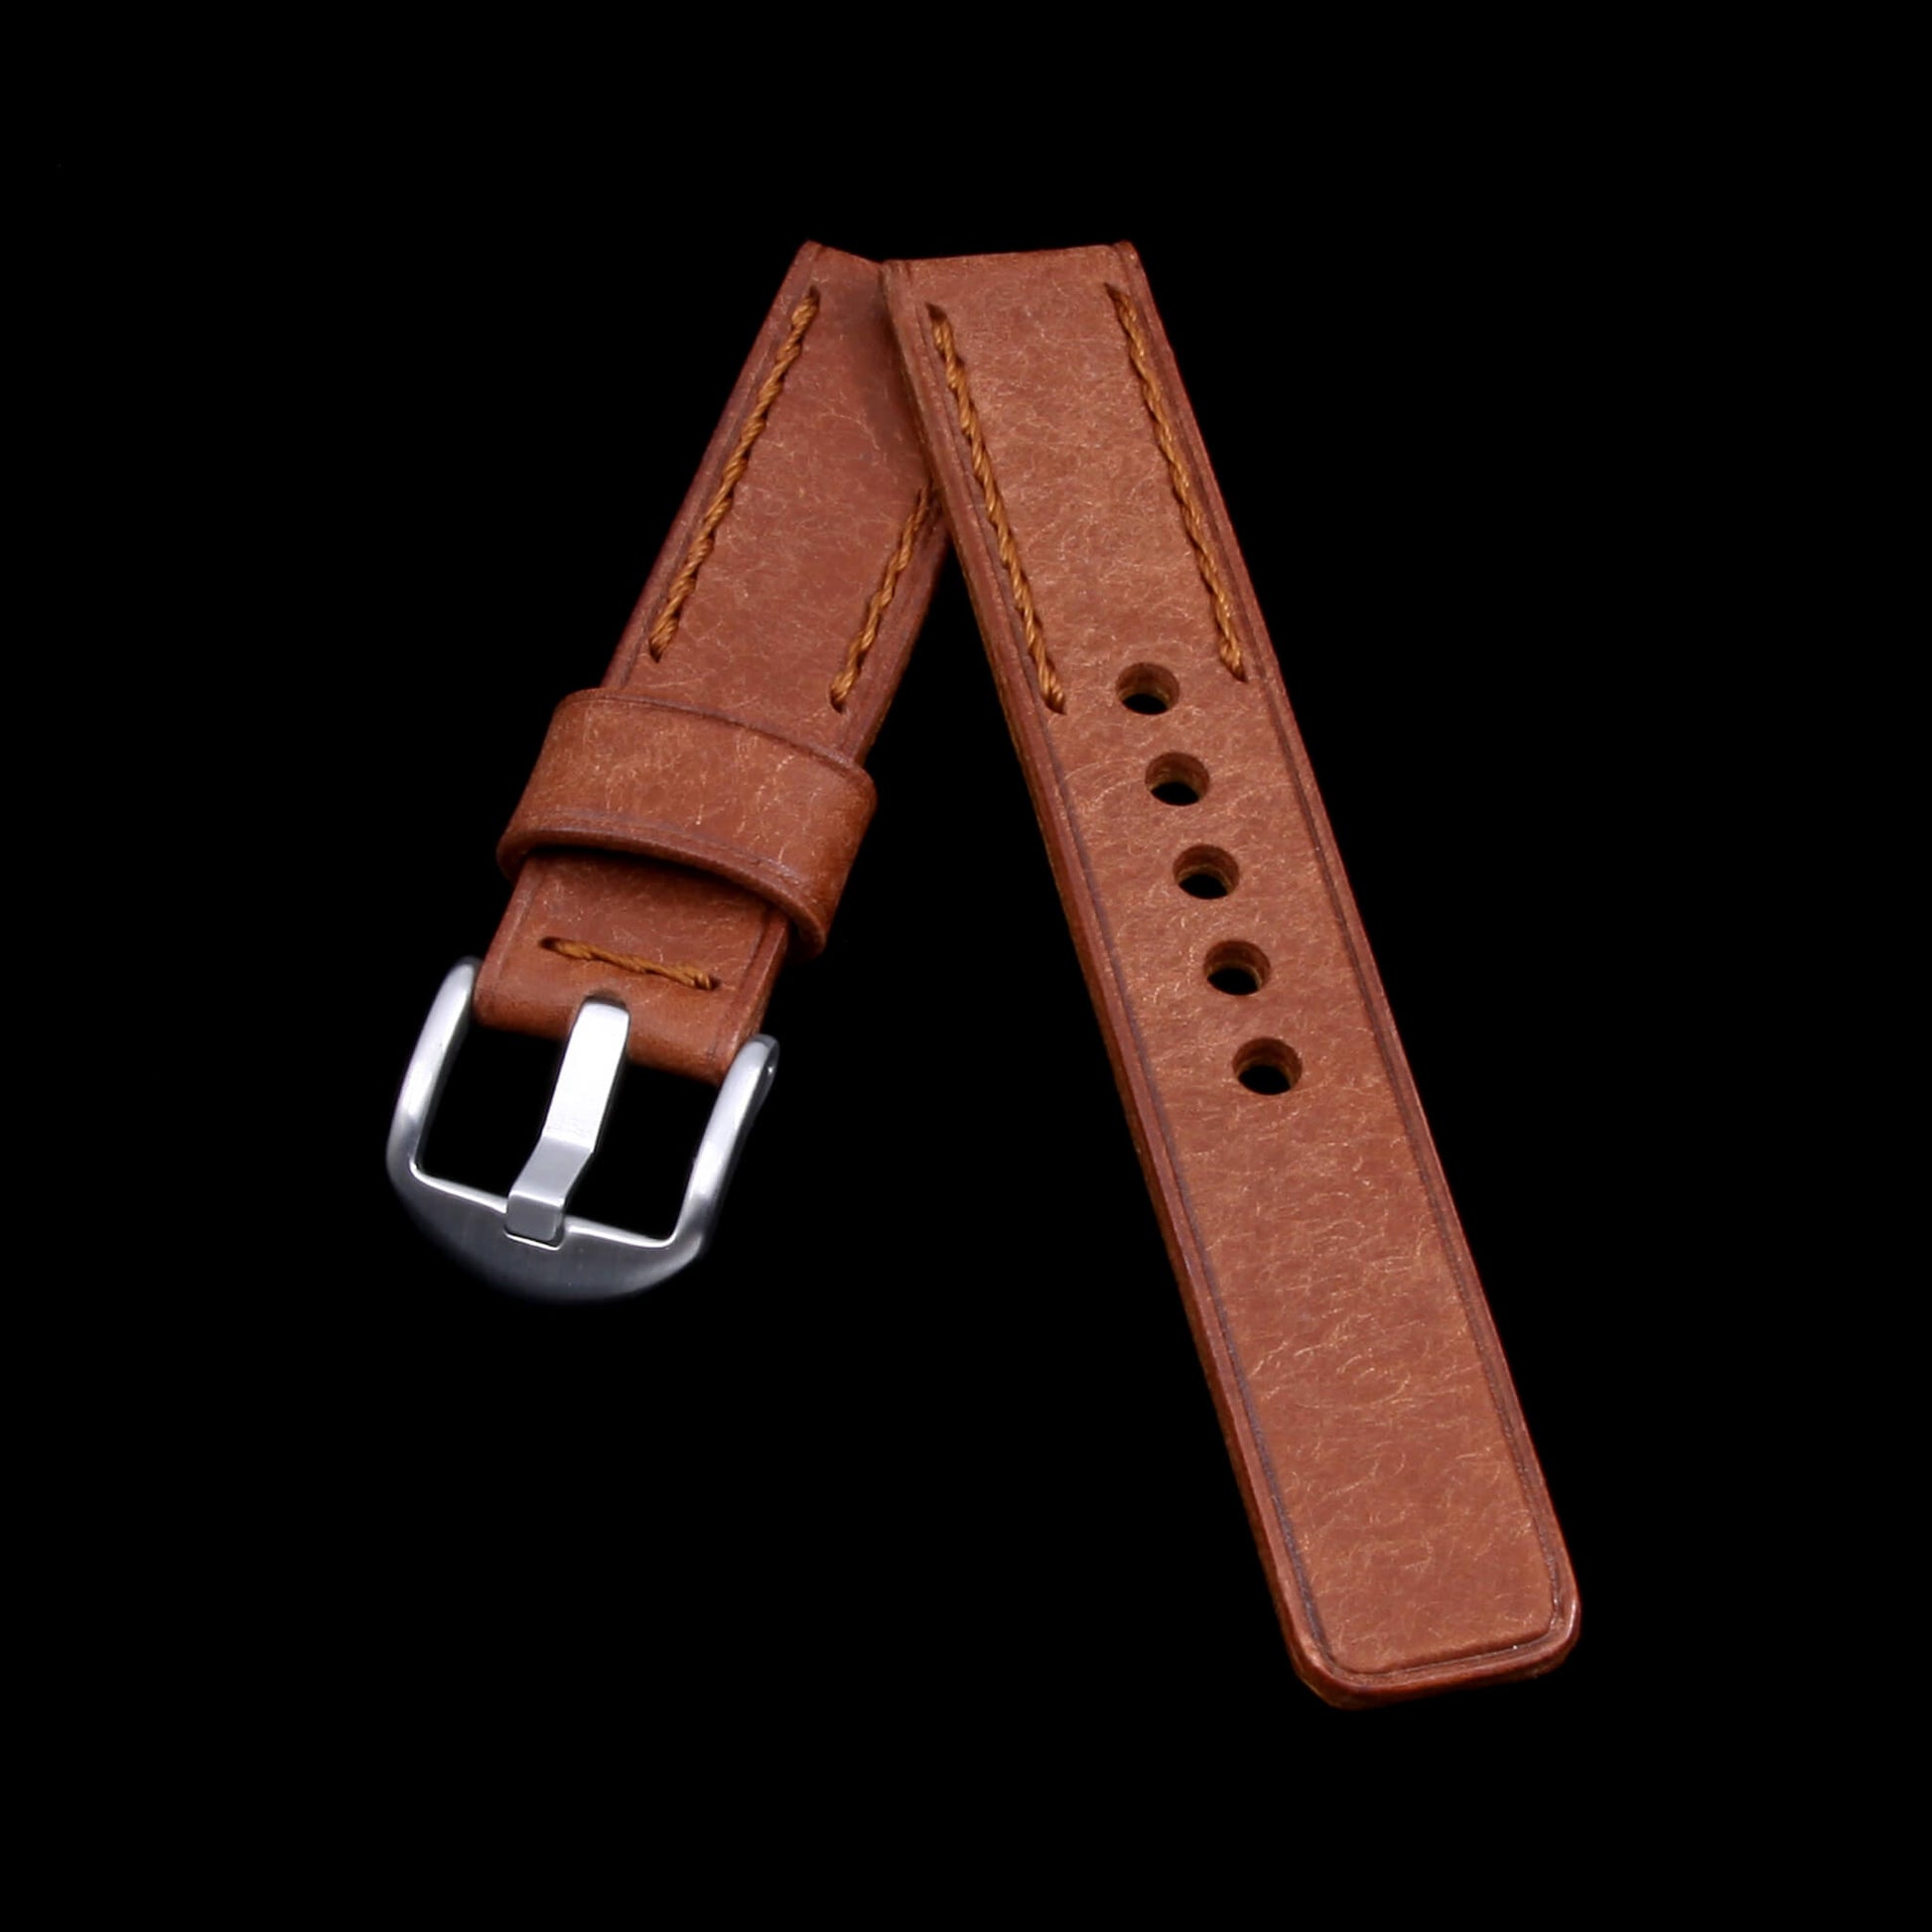 Leather Watch Strap, Rustic Russet | Chain Stitch | Full Grain Italian Veg Tanned Leather | Cozy Handmade